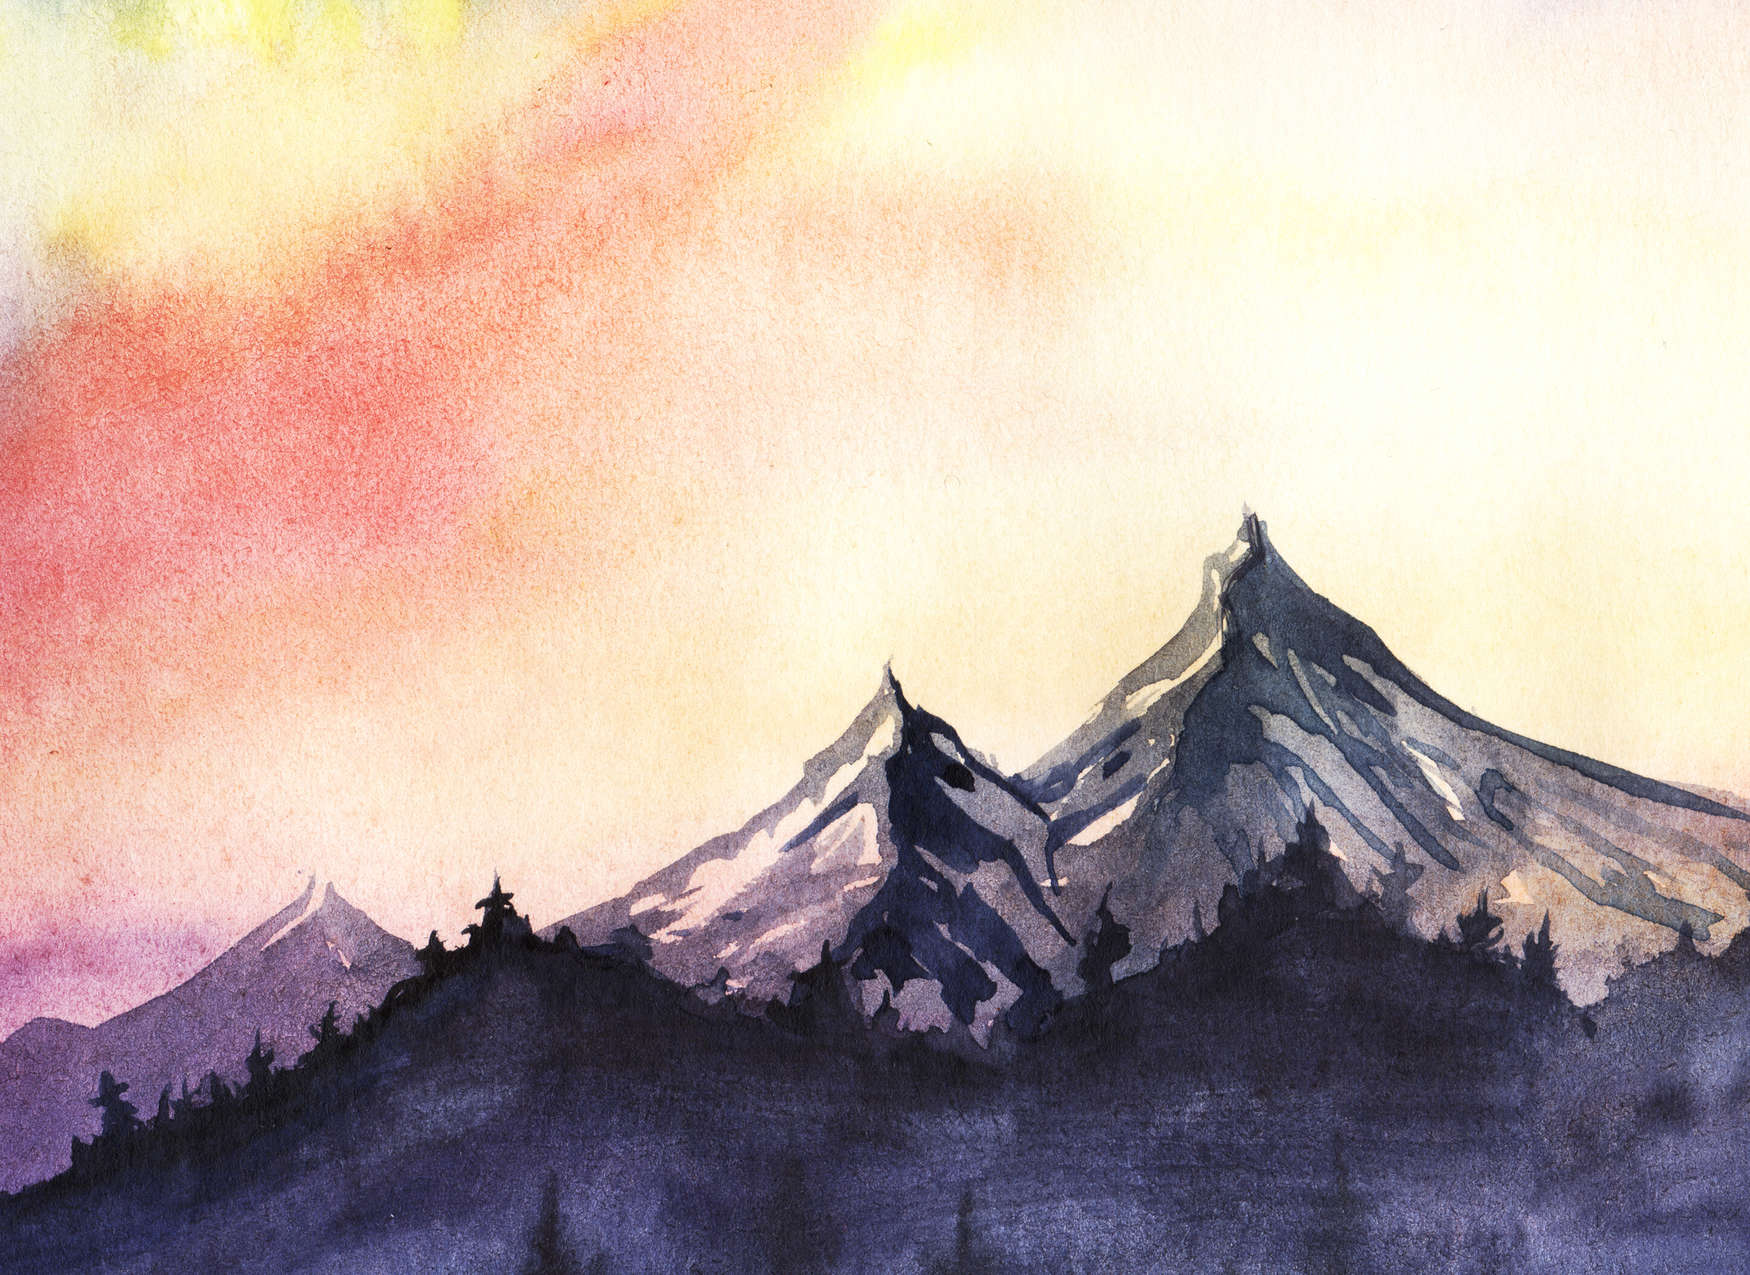             Mountain landscape in watercolour style - grey, yellow, pink
        